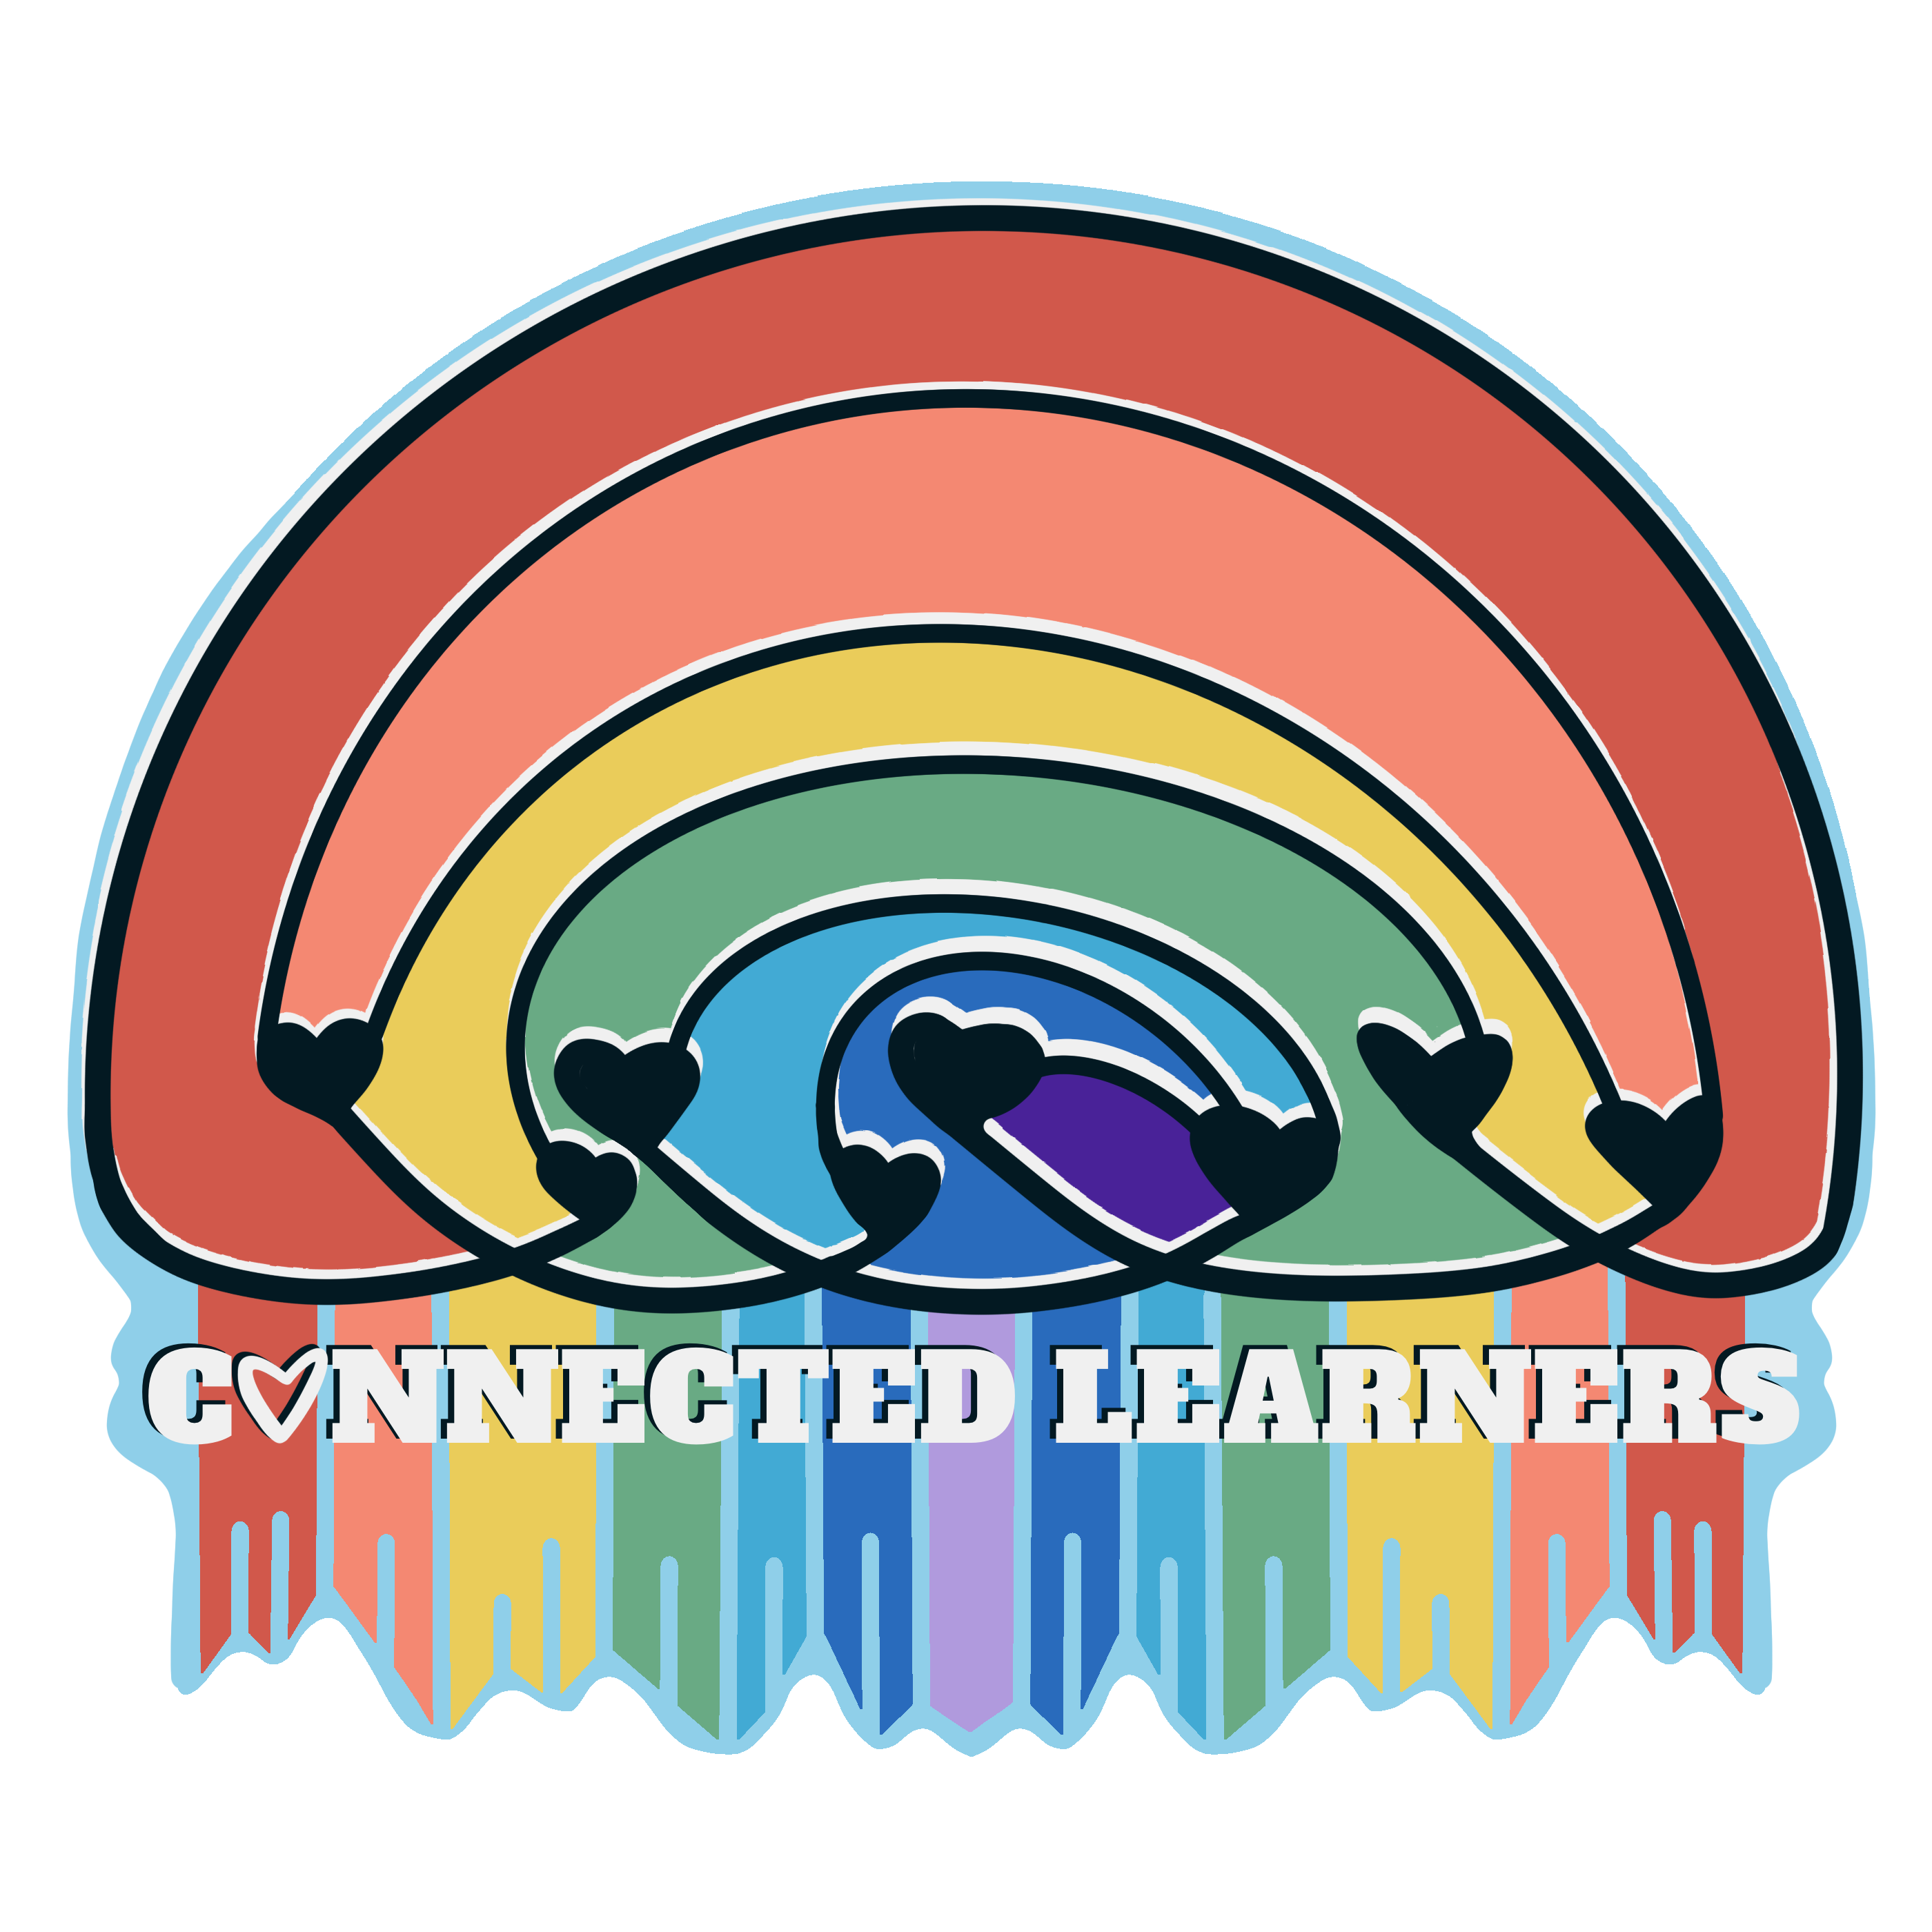 a rainbow connecting hearts and streams of color into connected learners